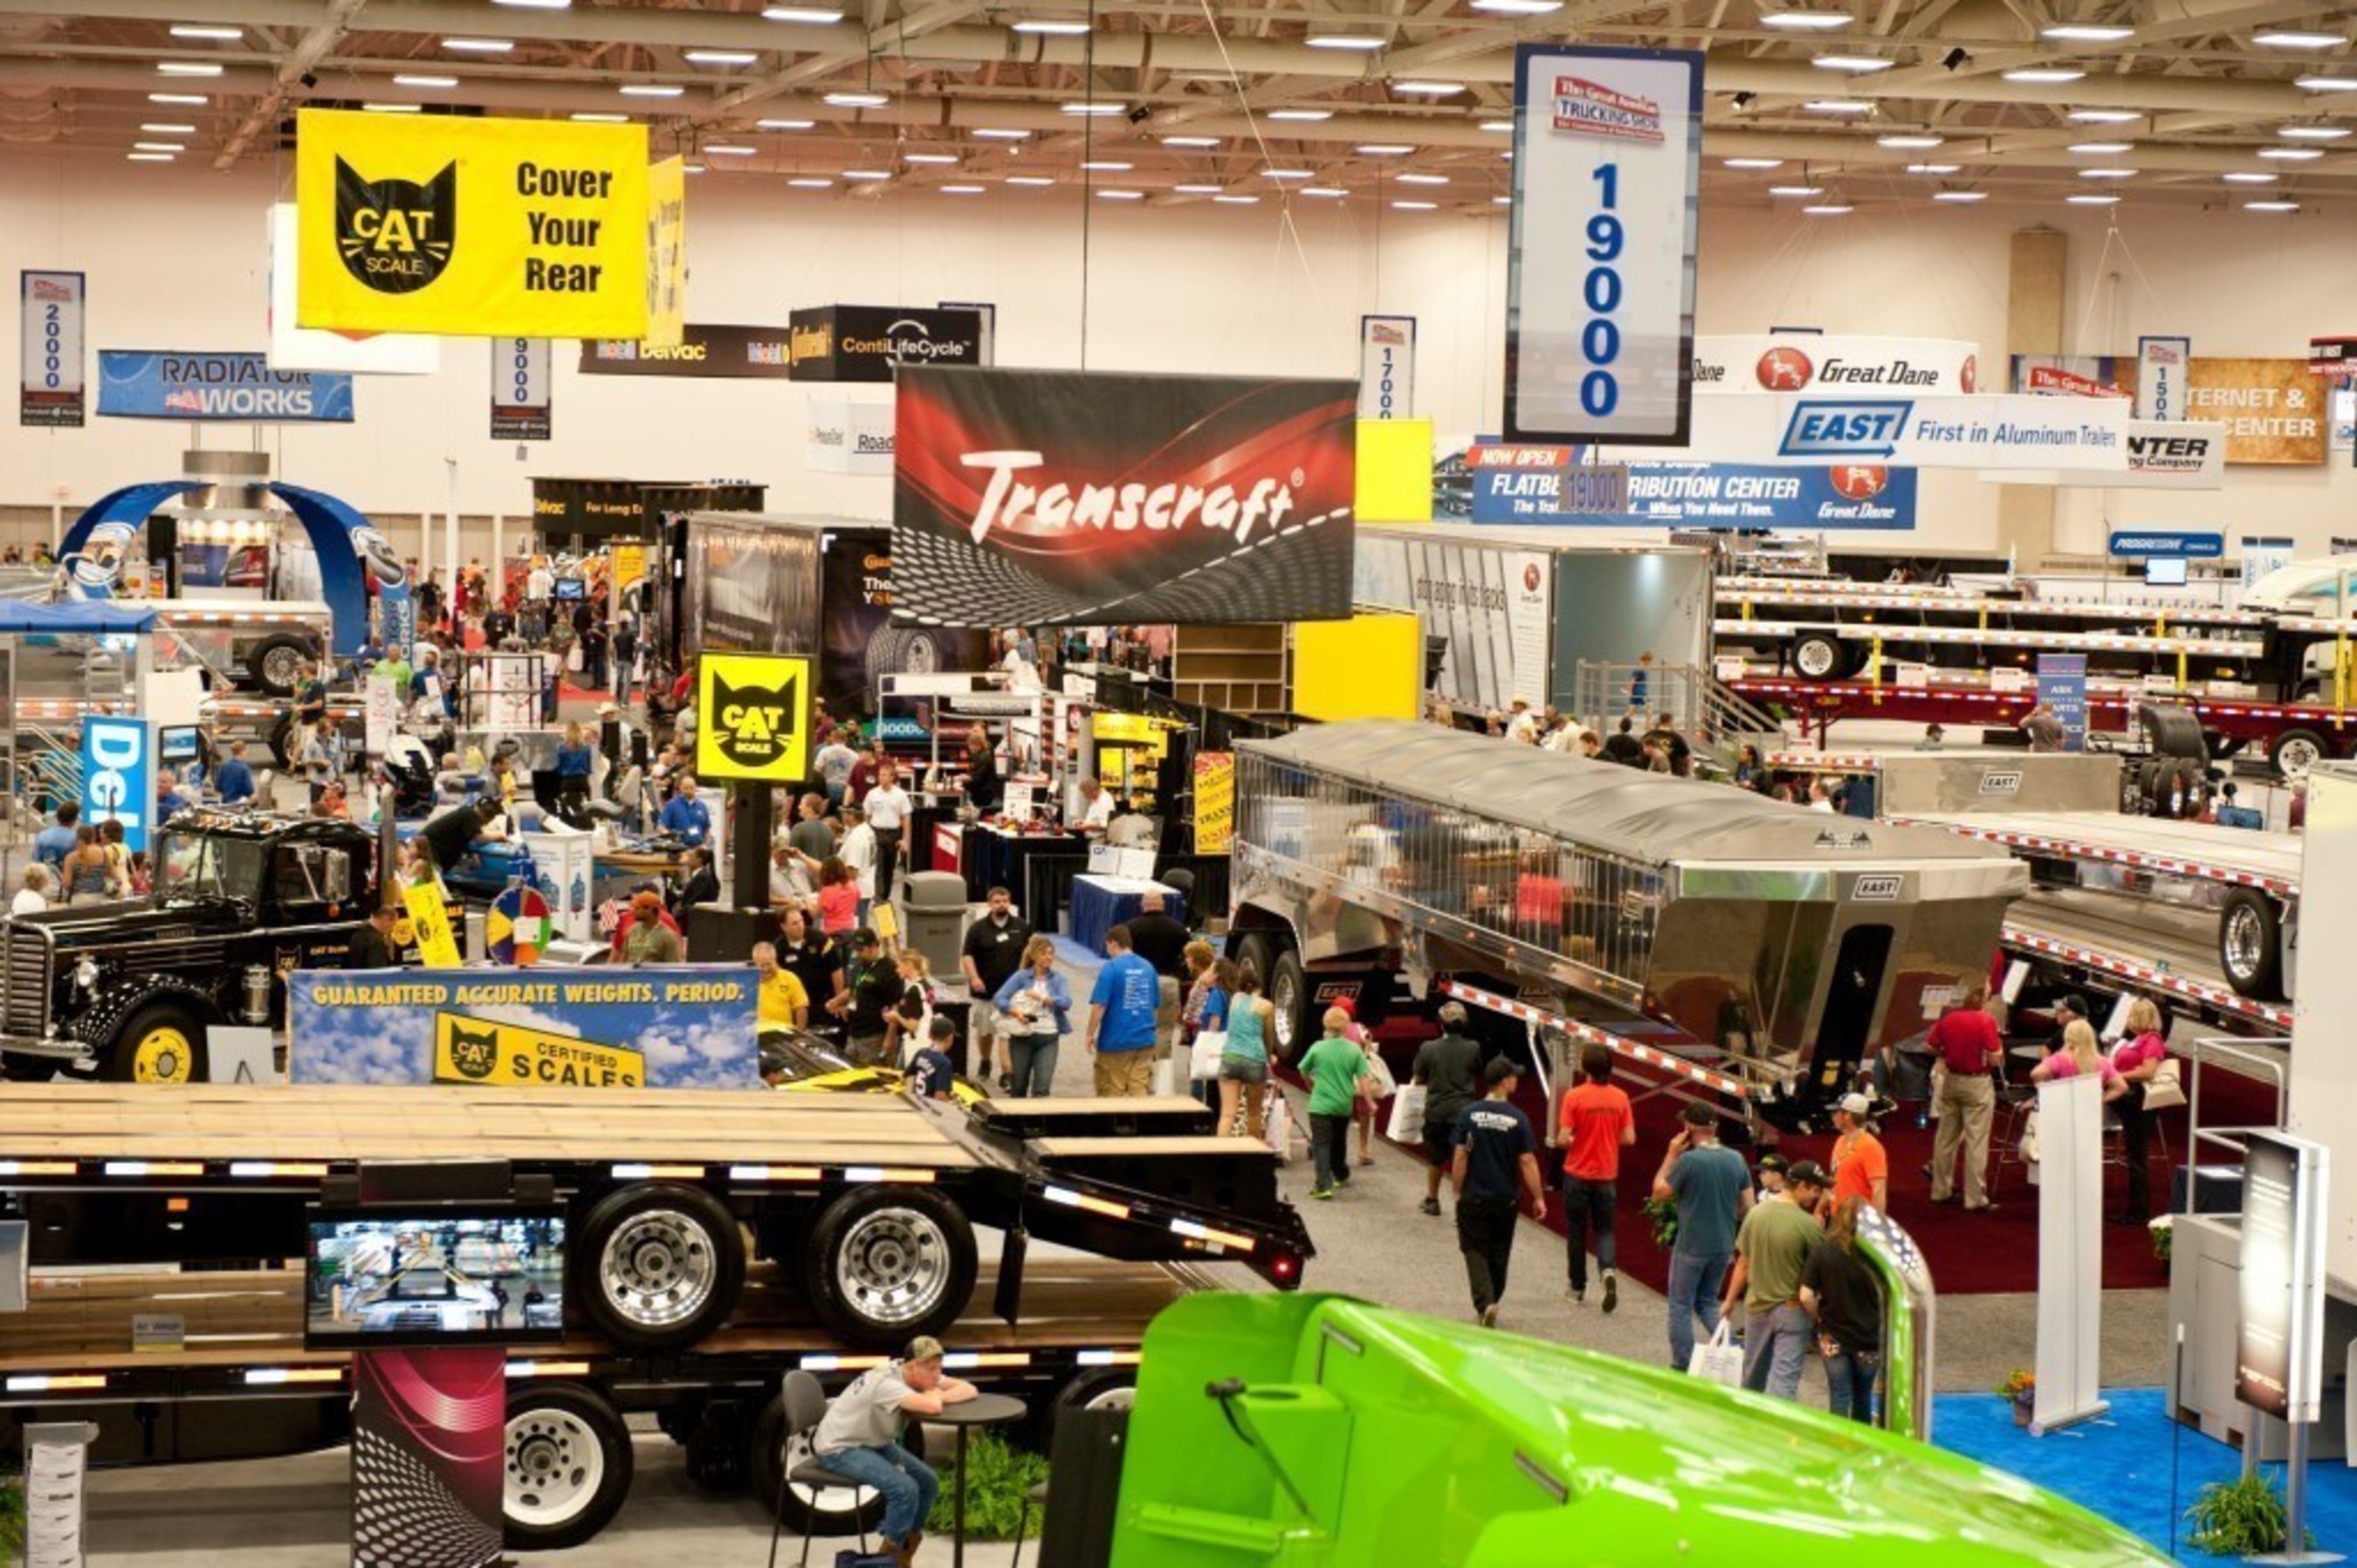 The Great American Trucking Show hosts 500+ trucking industry products and services in 500,000+ sq. ft. of exhibit space.